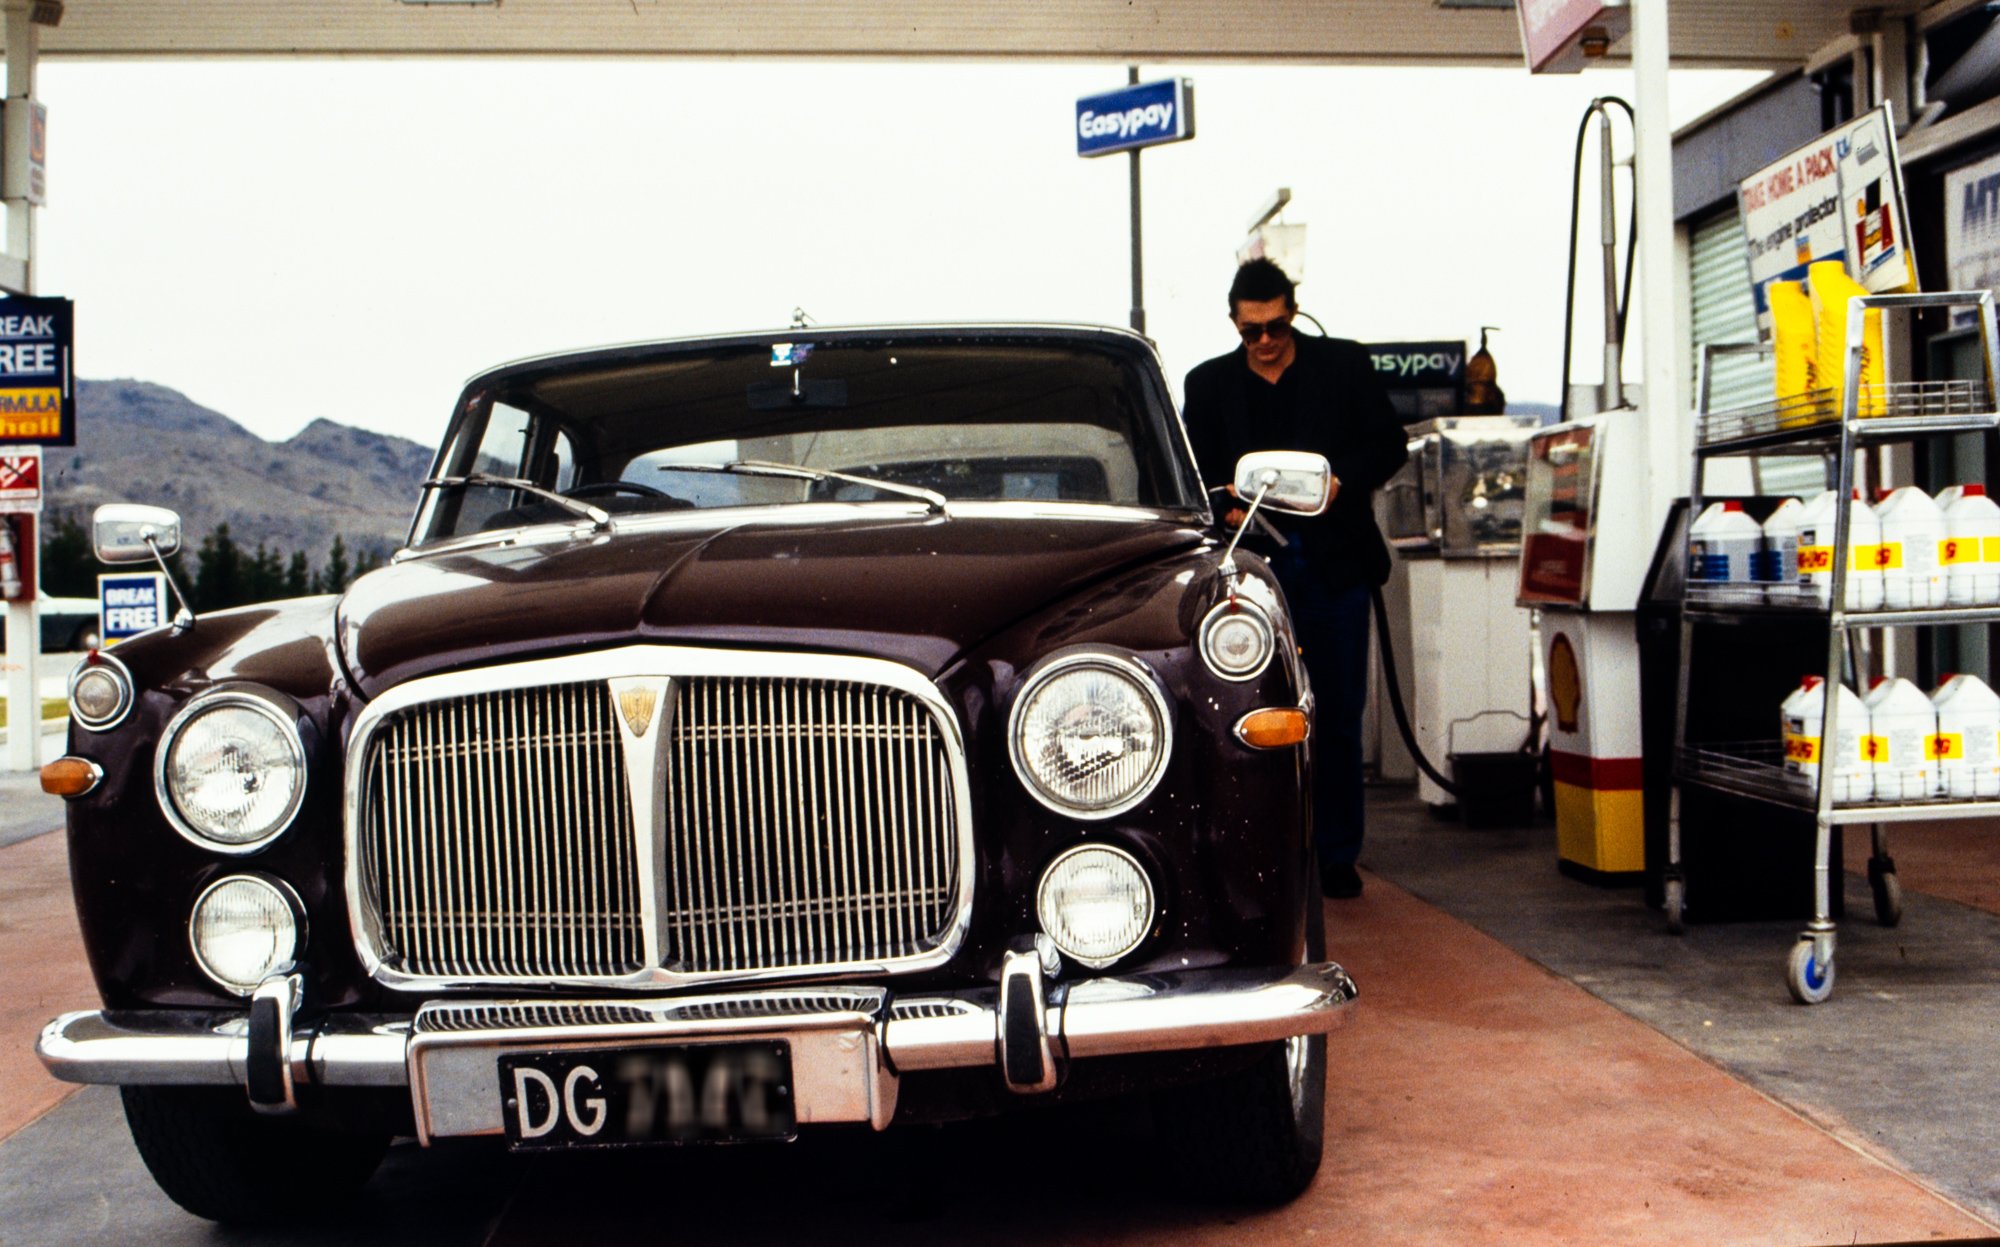 Rover P5B Coupé at a gas station in the South Island of New Zealand